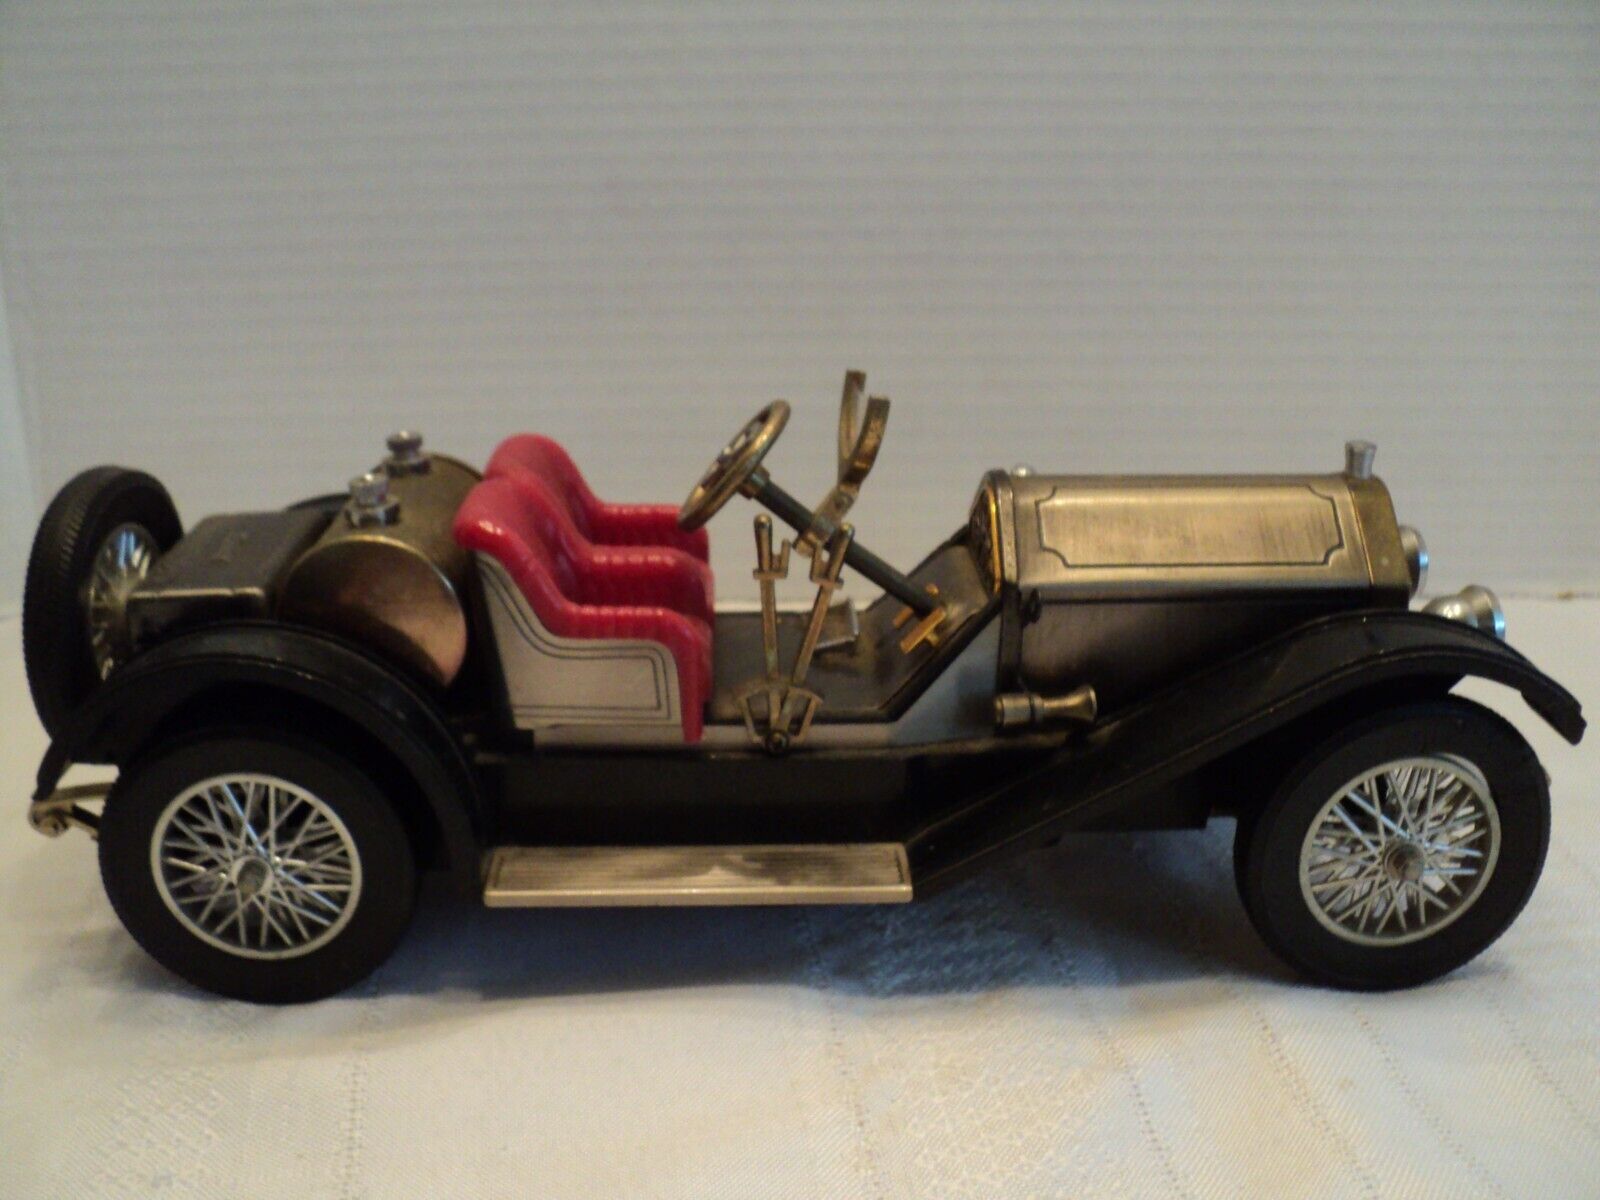 Antique Metal Replica Roadster with Novelty, SS Transistor Radio, 1/18 Scale